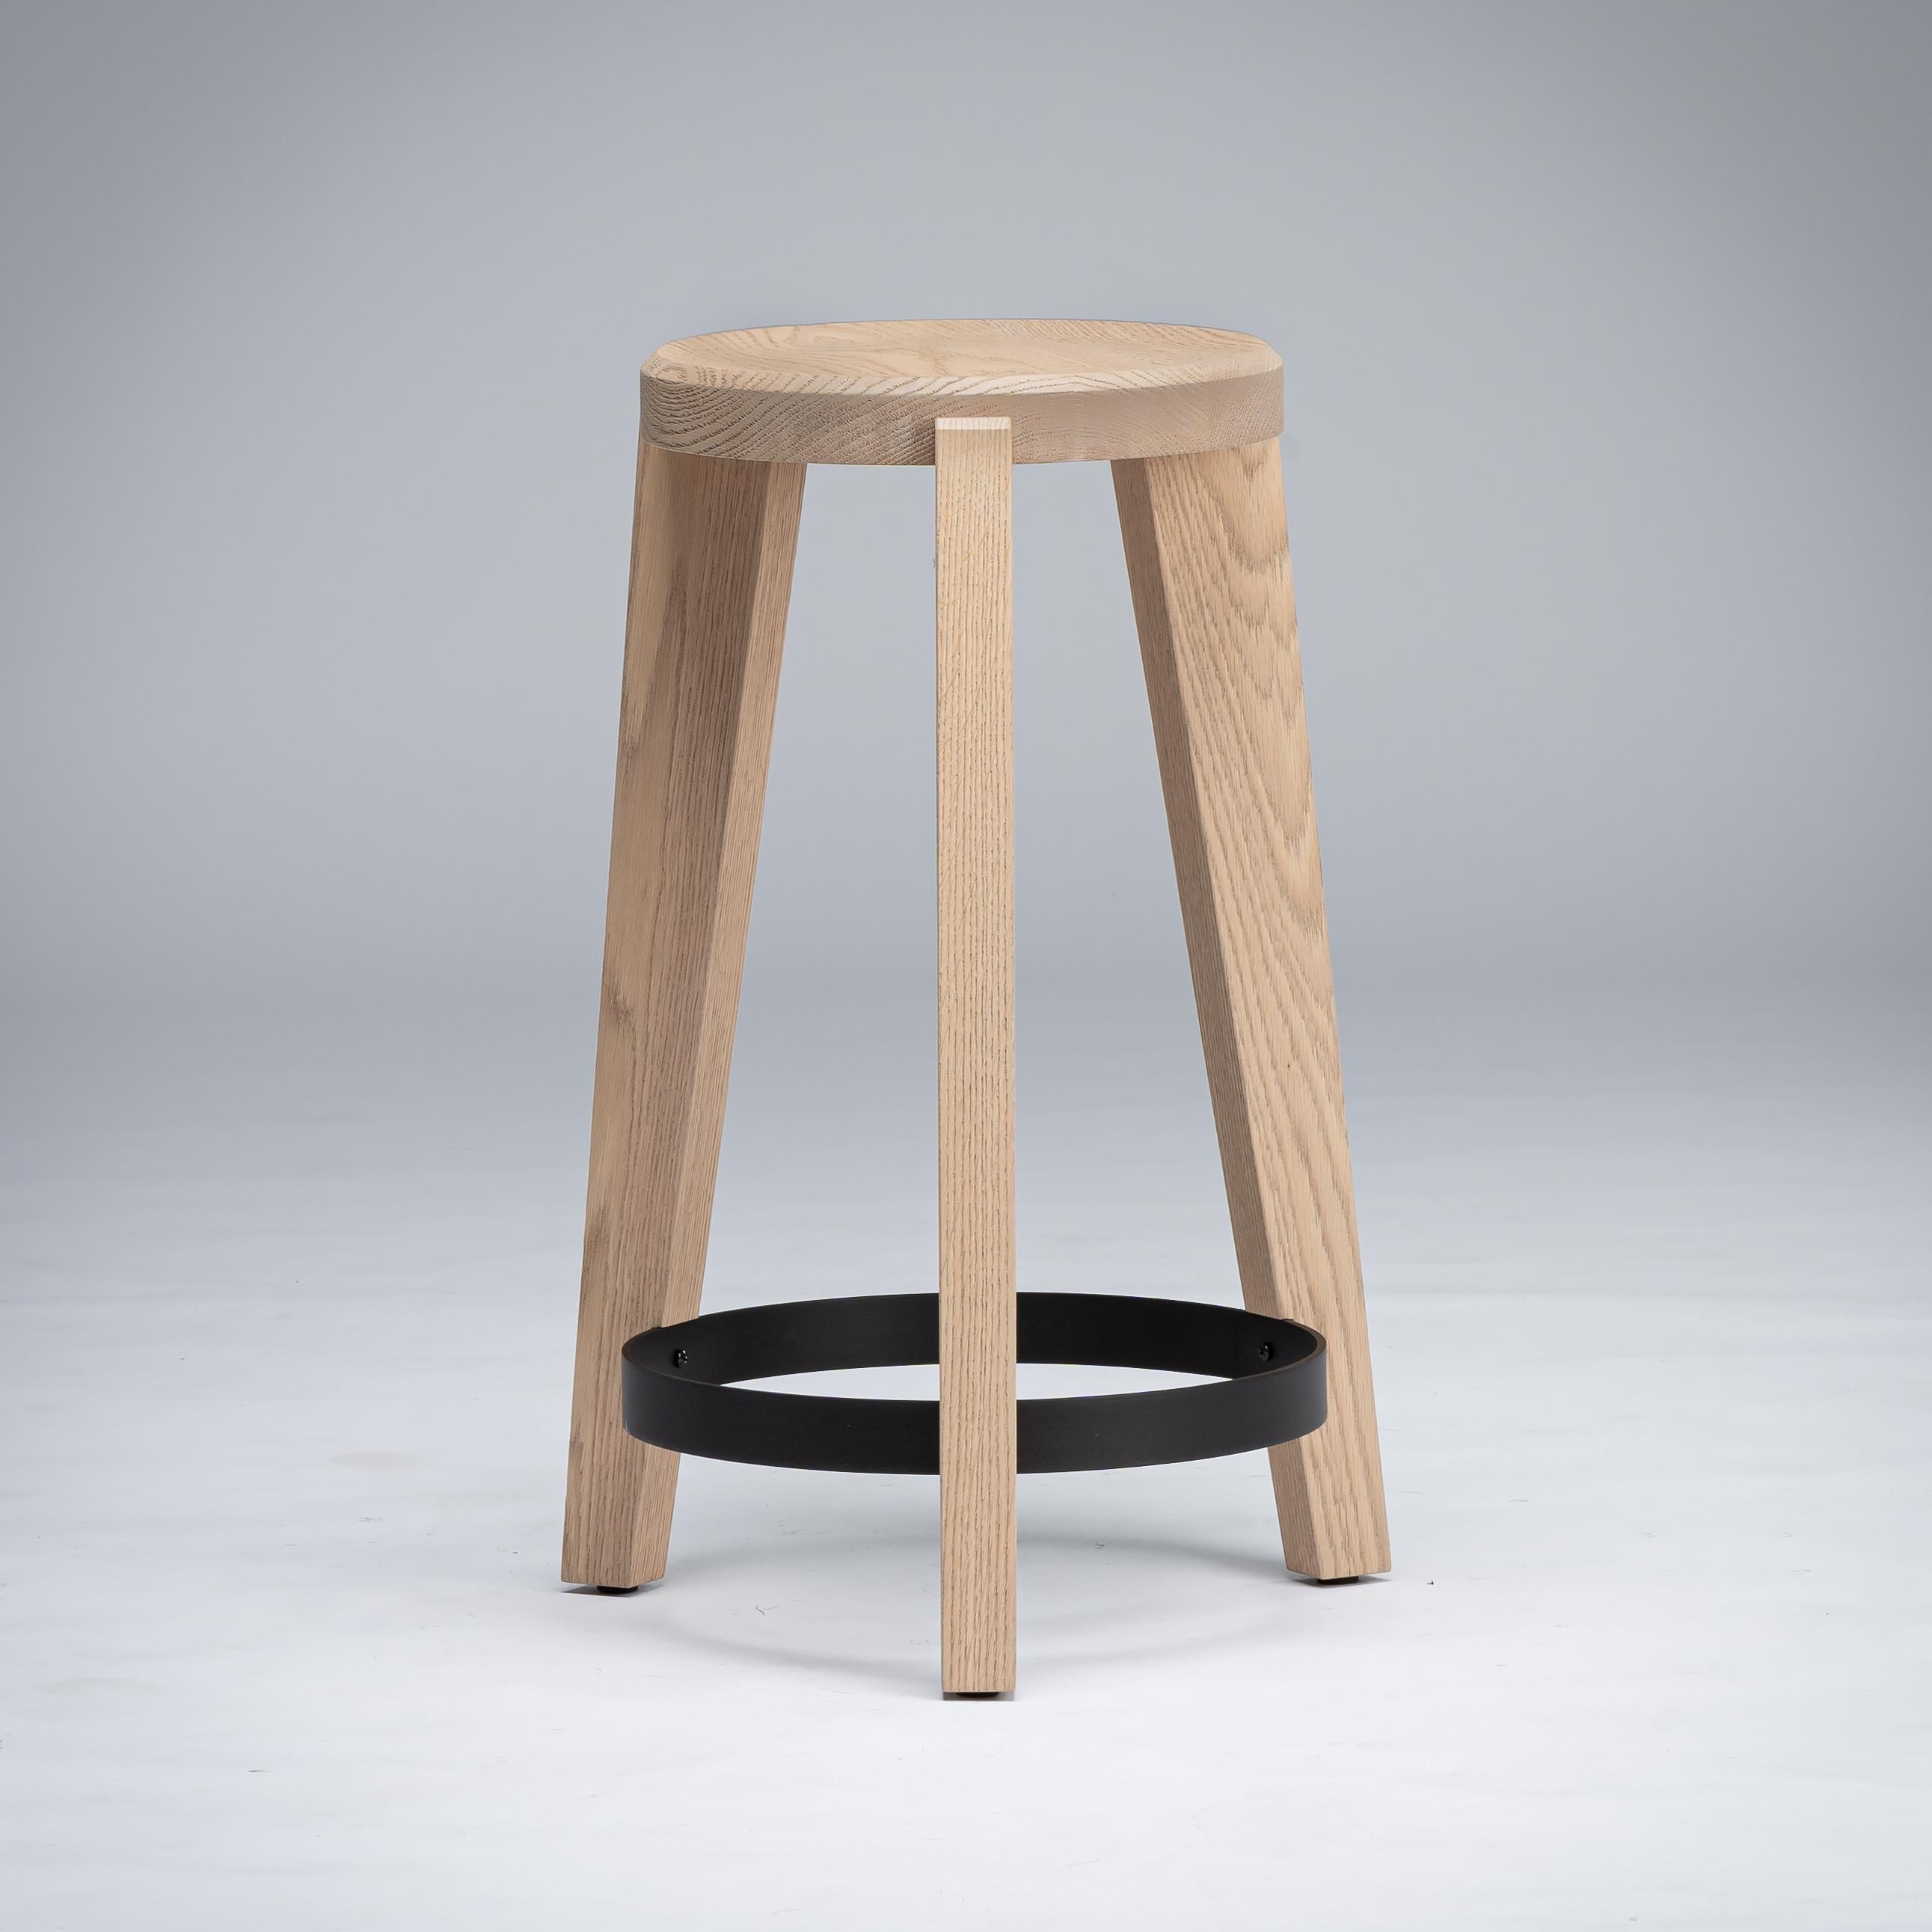 Counter stool by Mandy Graham 
Solid American walnut and/or american sandblasted oak 
Solid brushed brass / dark bronze base

Measures: 13